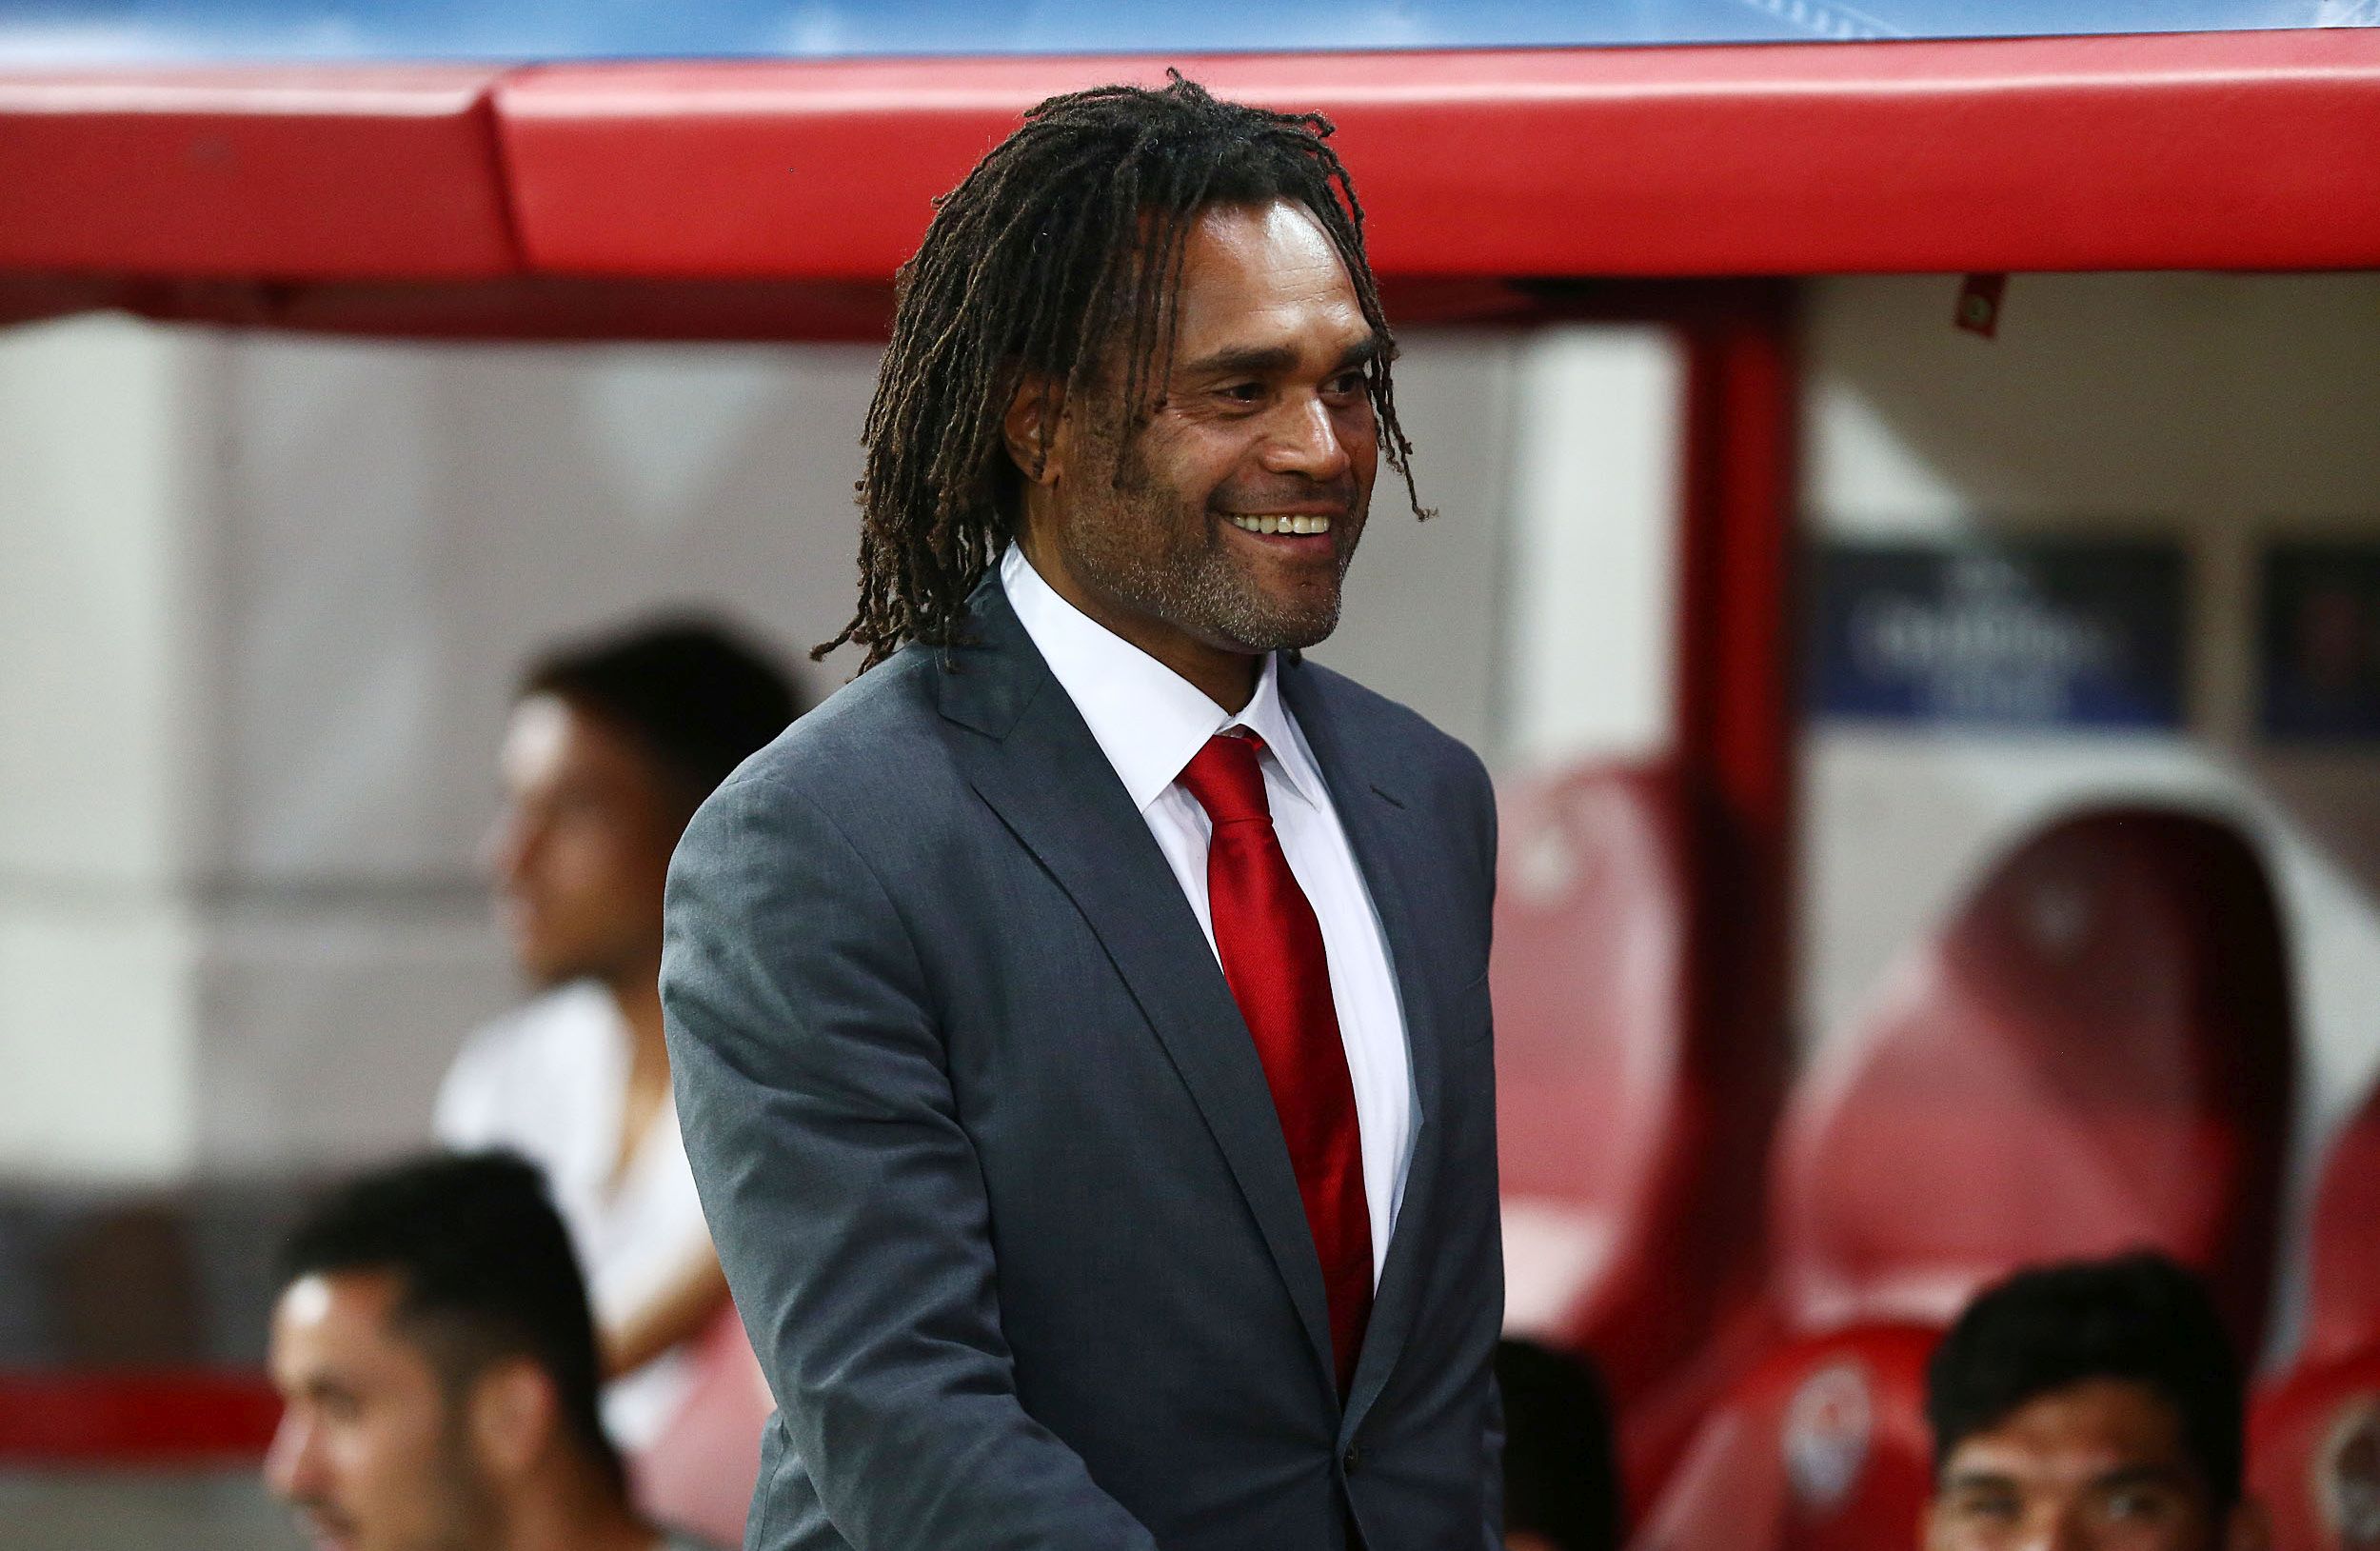 Quotes by Mr Karembeu